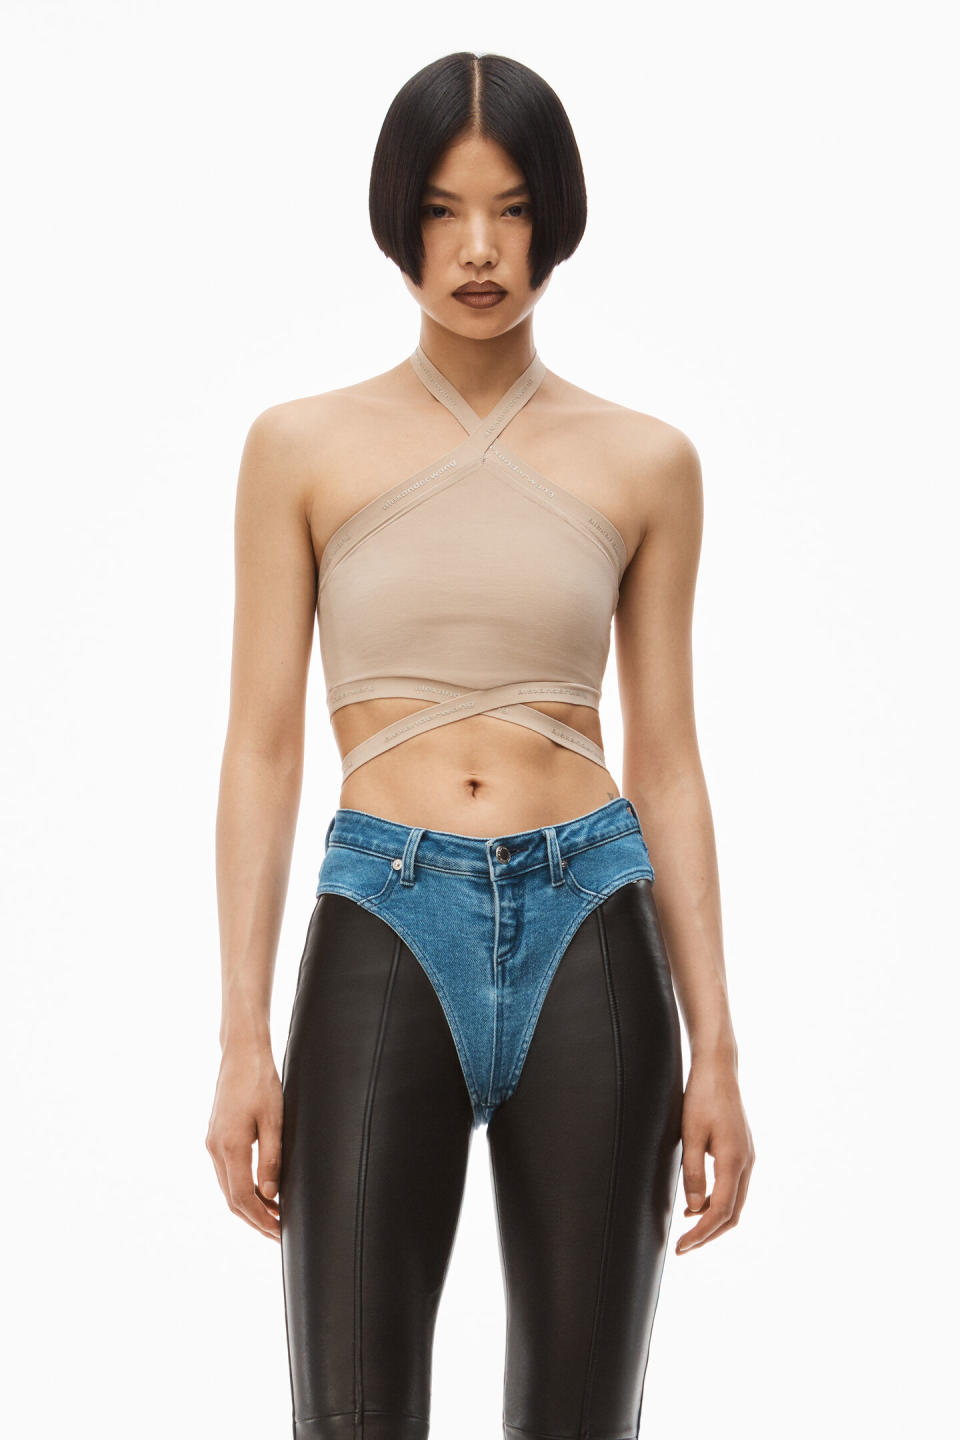 Alexander Wang Sale: Save Up to $80% Off -- Items Starting at $45